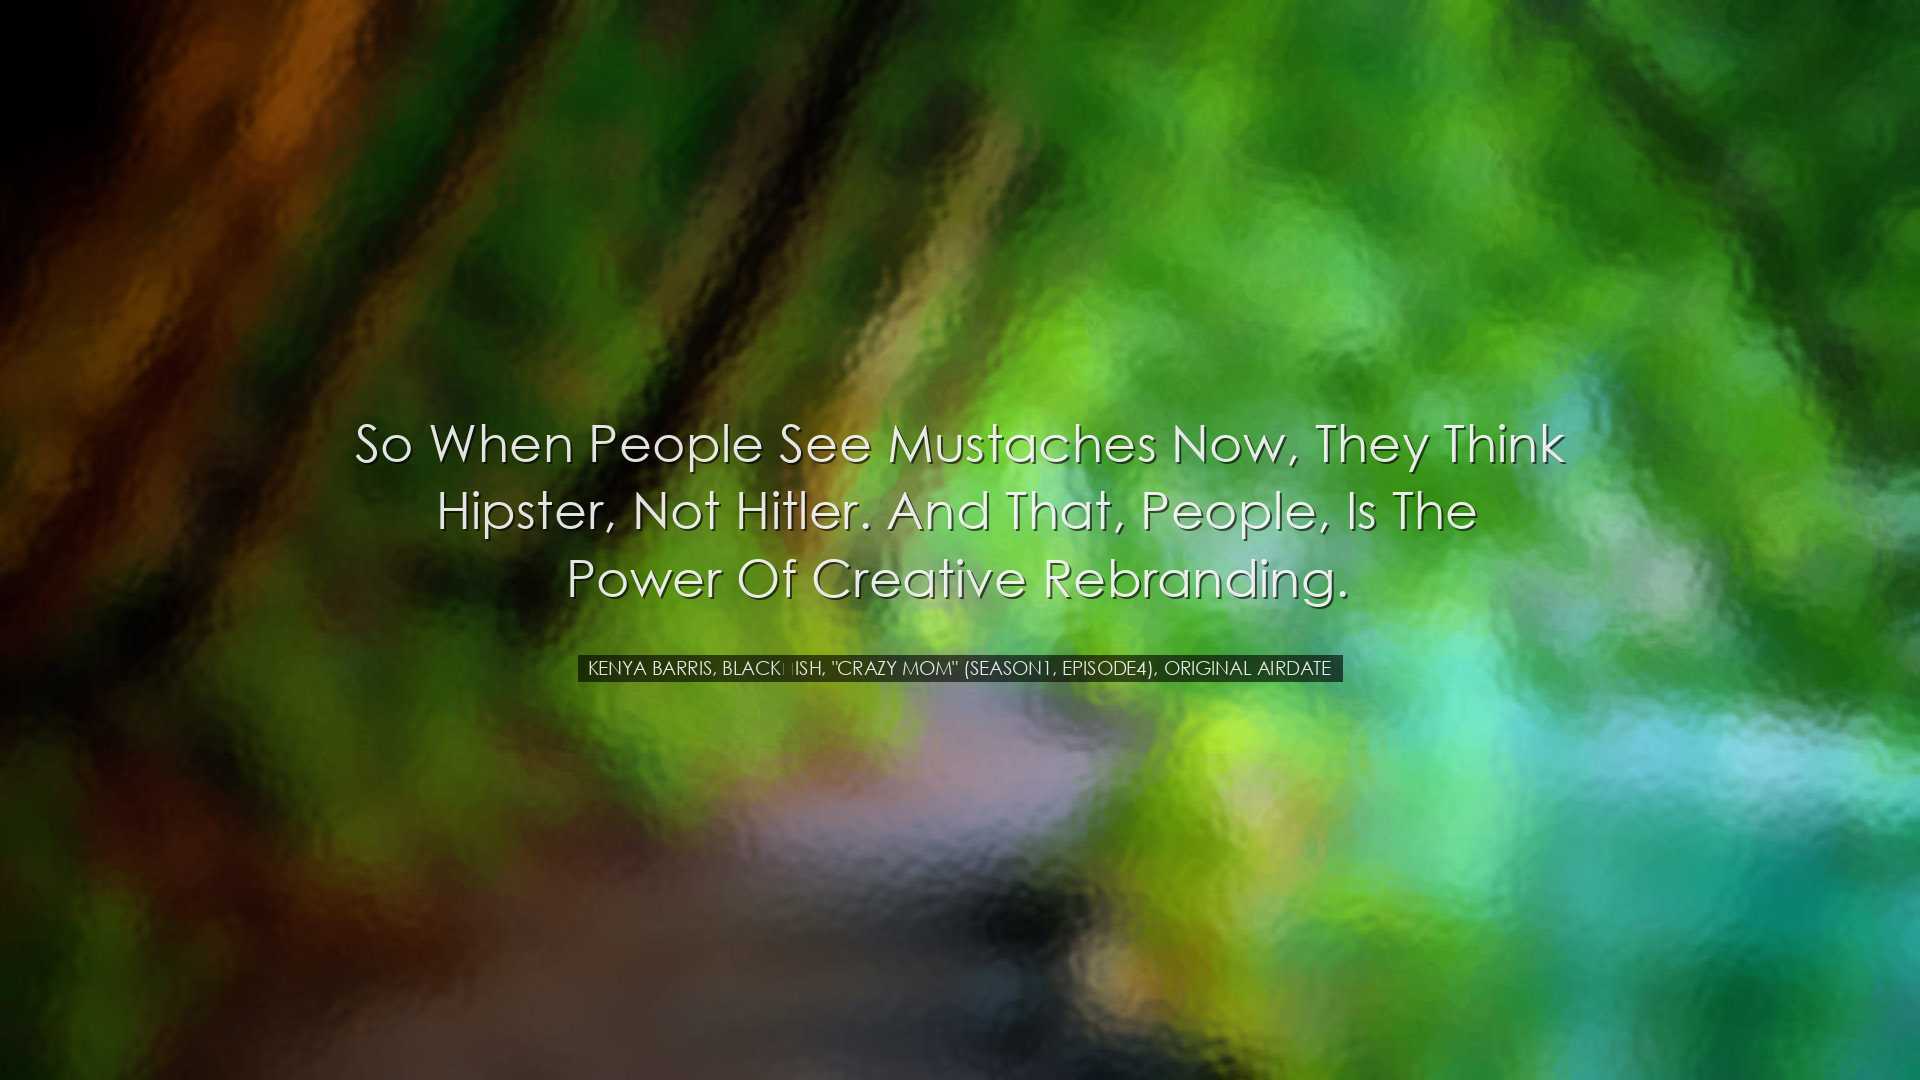 So when people see mustaches now, they think hipster, not Hitler.